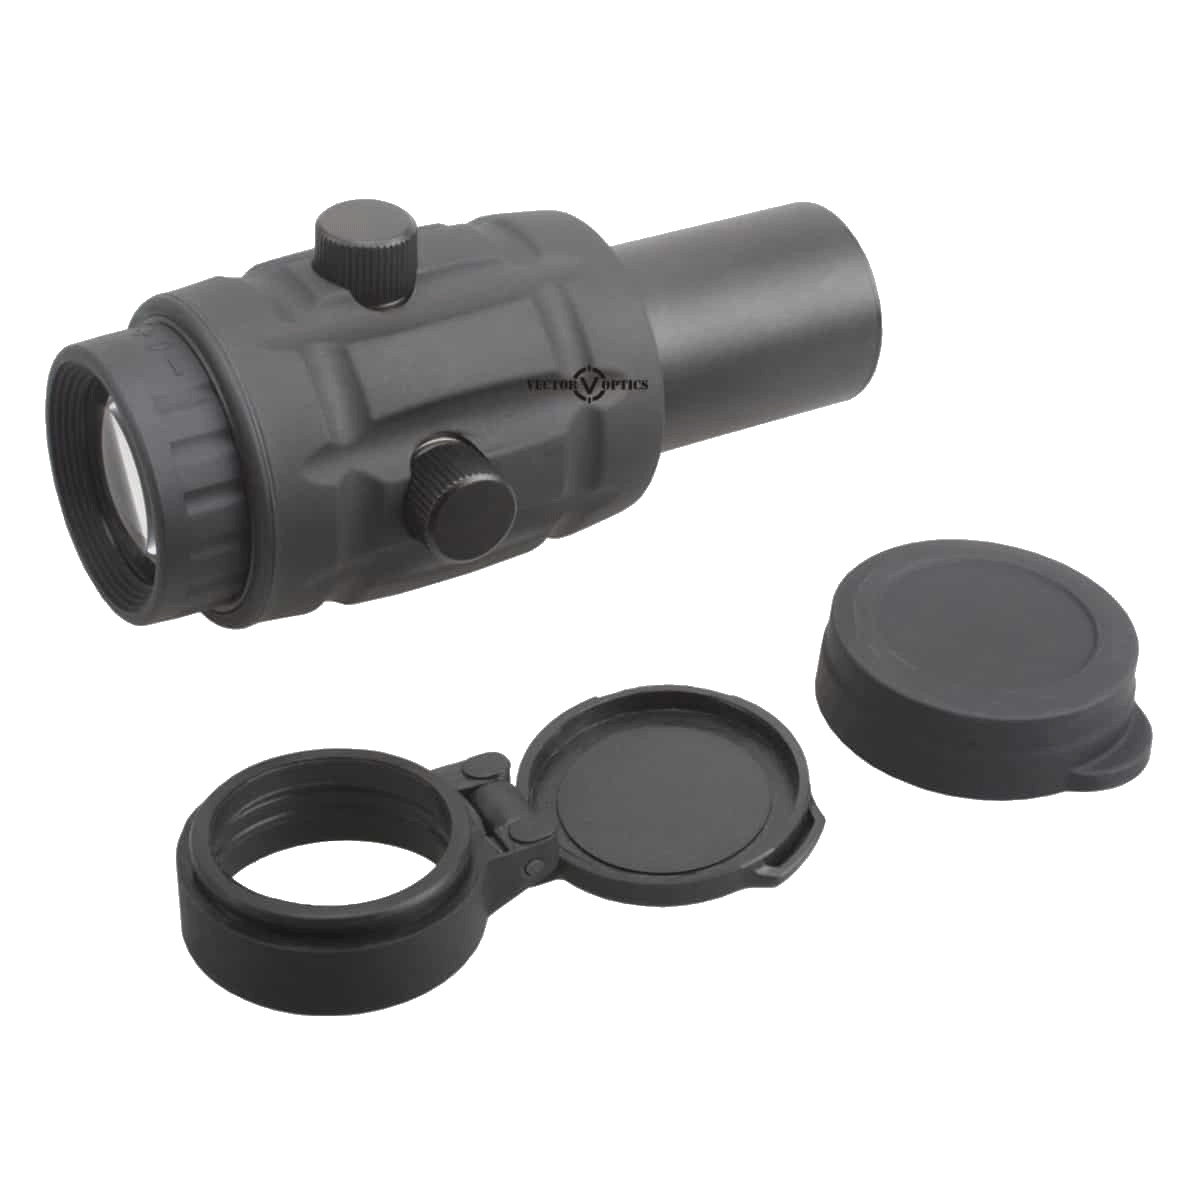 3x Magnifier with Steel Mount 